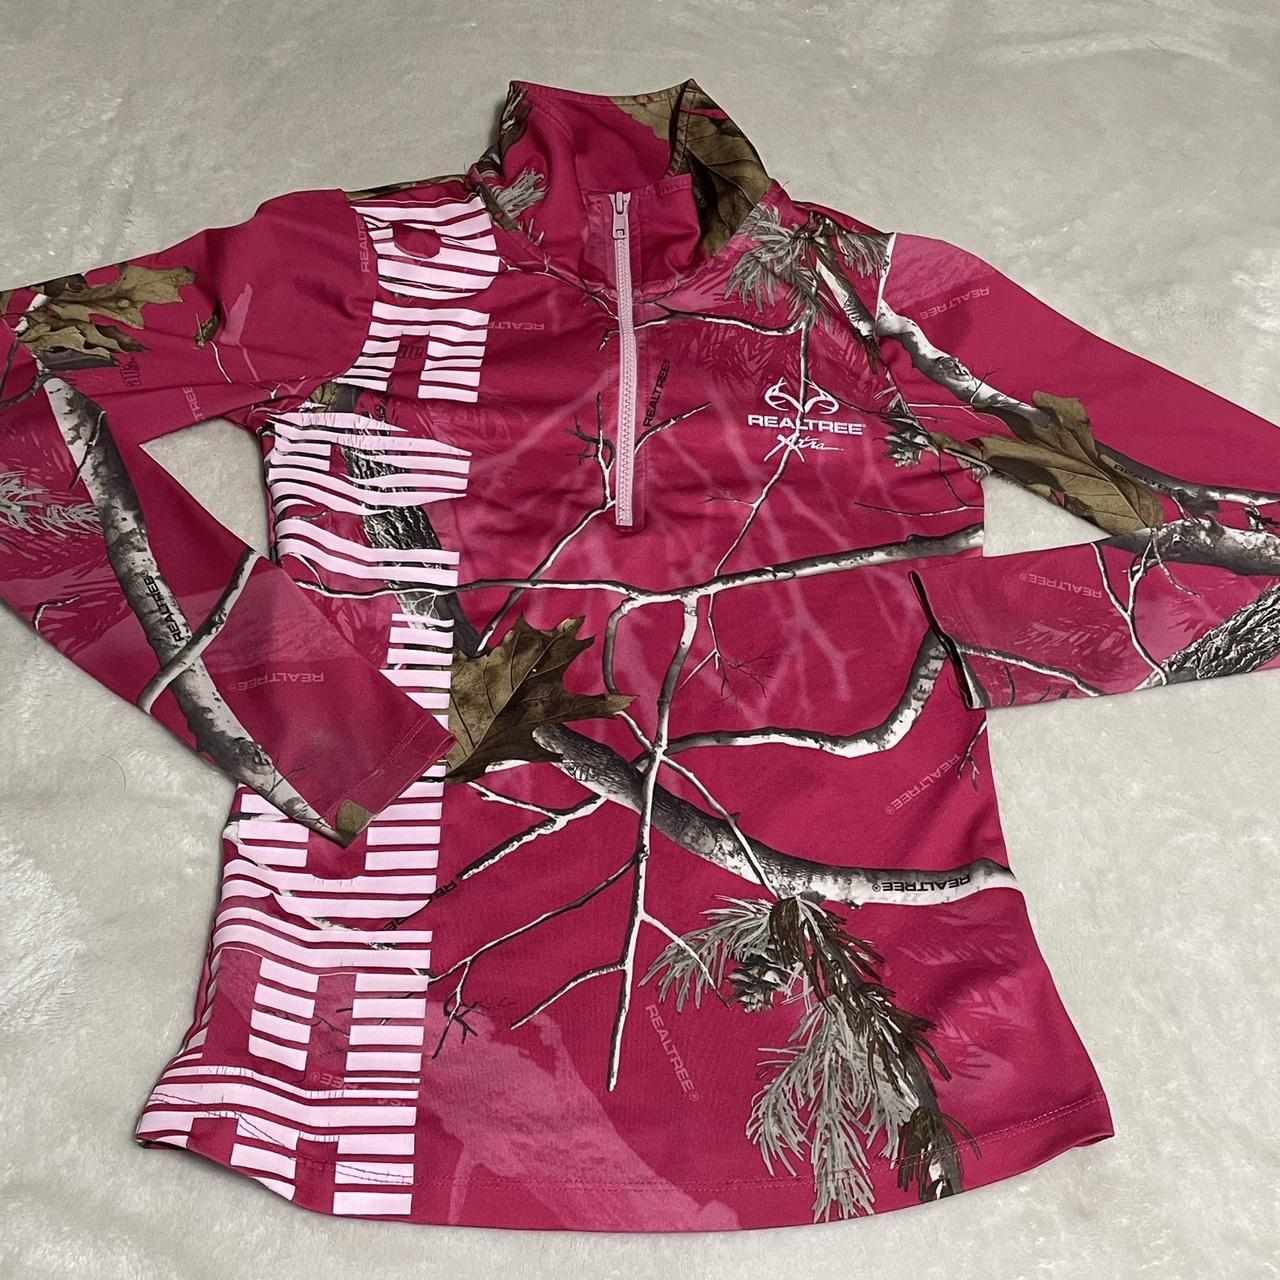 Realtree Women's Small Camouflauge with Pink Hooded Coat Hunting